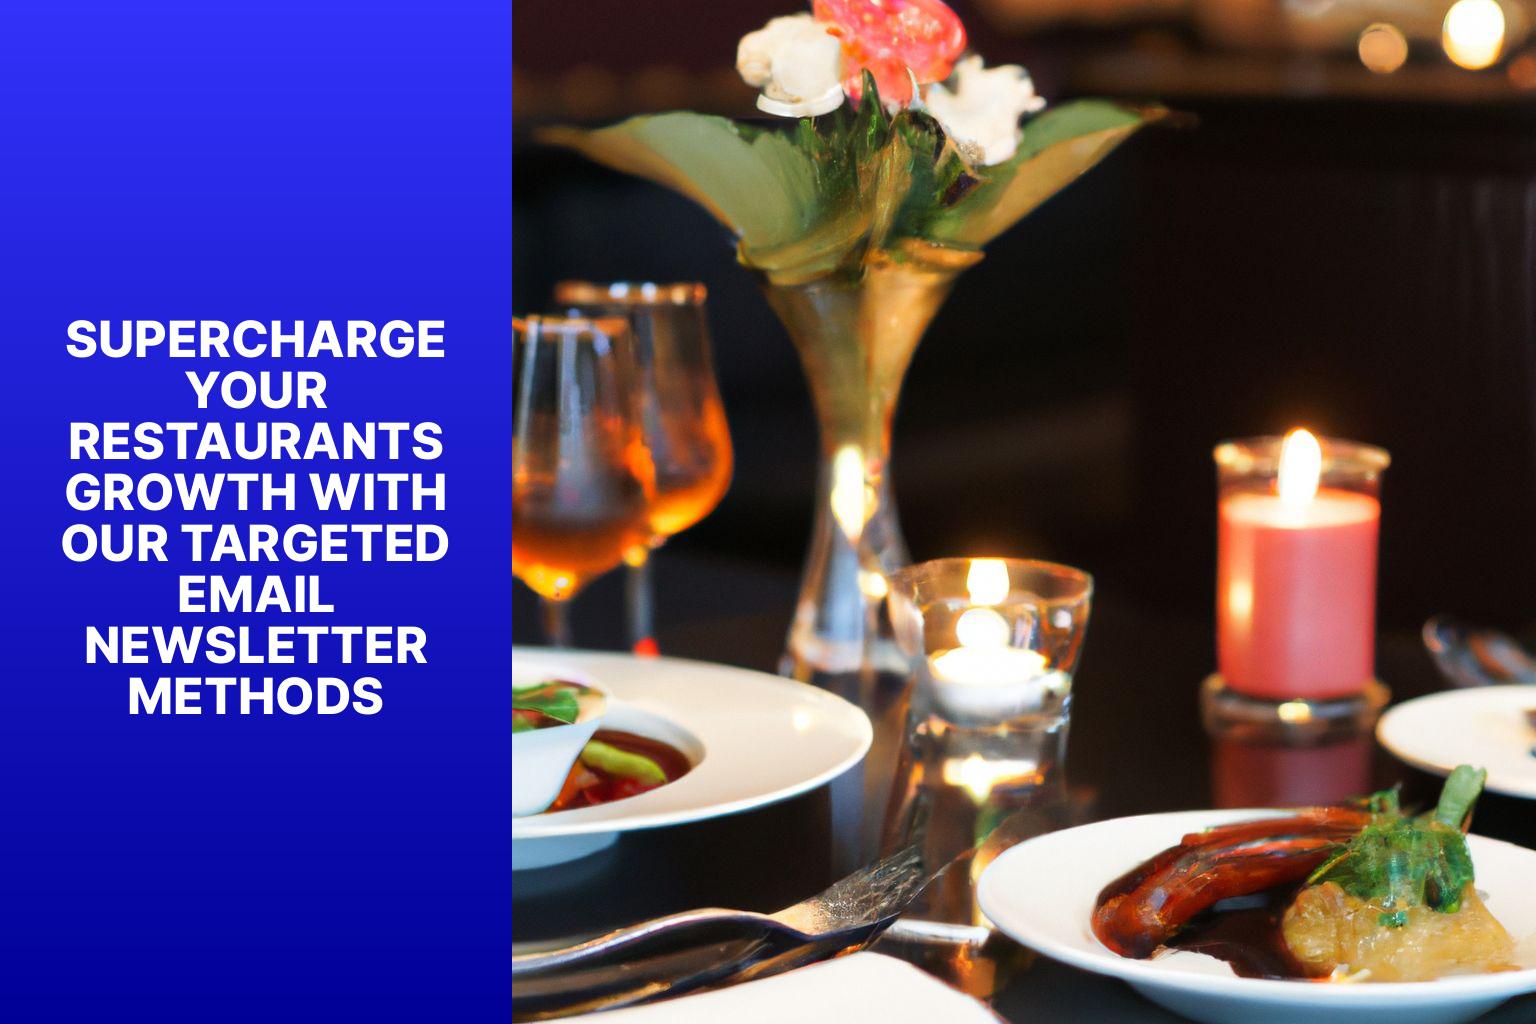 Supercharge Your Restaurants Growth with Our Targeted Email Newsletter Methods